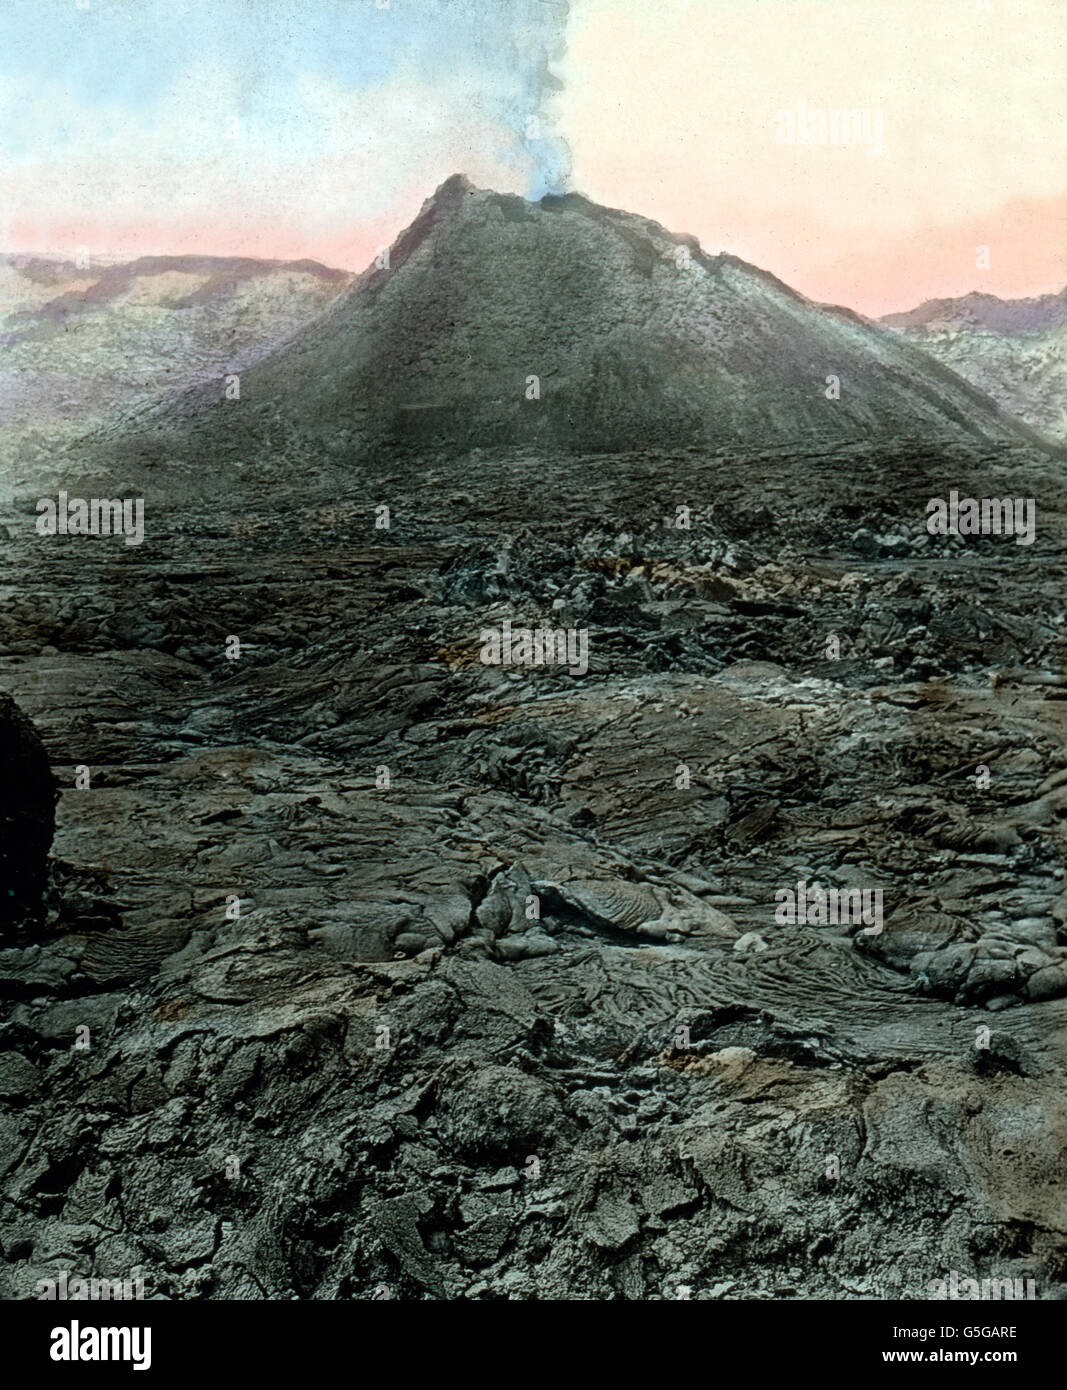 Ein Lavafeld am Vesuv. Dry lava at the Mount Vesuvius. volcano, lava, cloud, dust, ash, nature, spectacle, volcanicity, volcanism, geology, history, historical, 1910s, 1920s, 20th century, archive, Carl Simon, hand-coloured glass slide Stock Photo